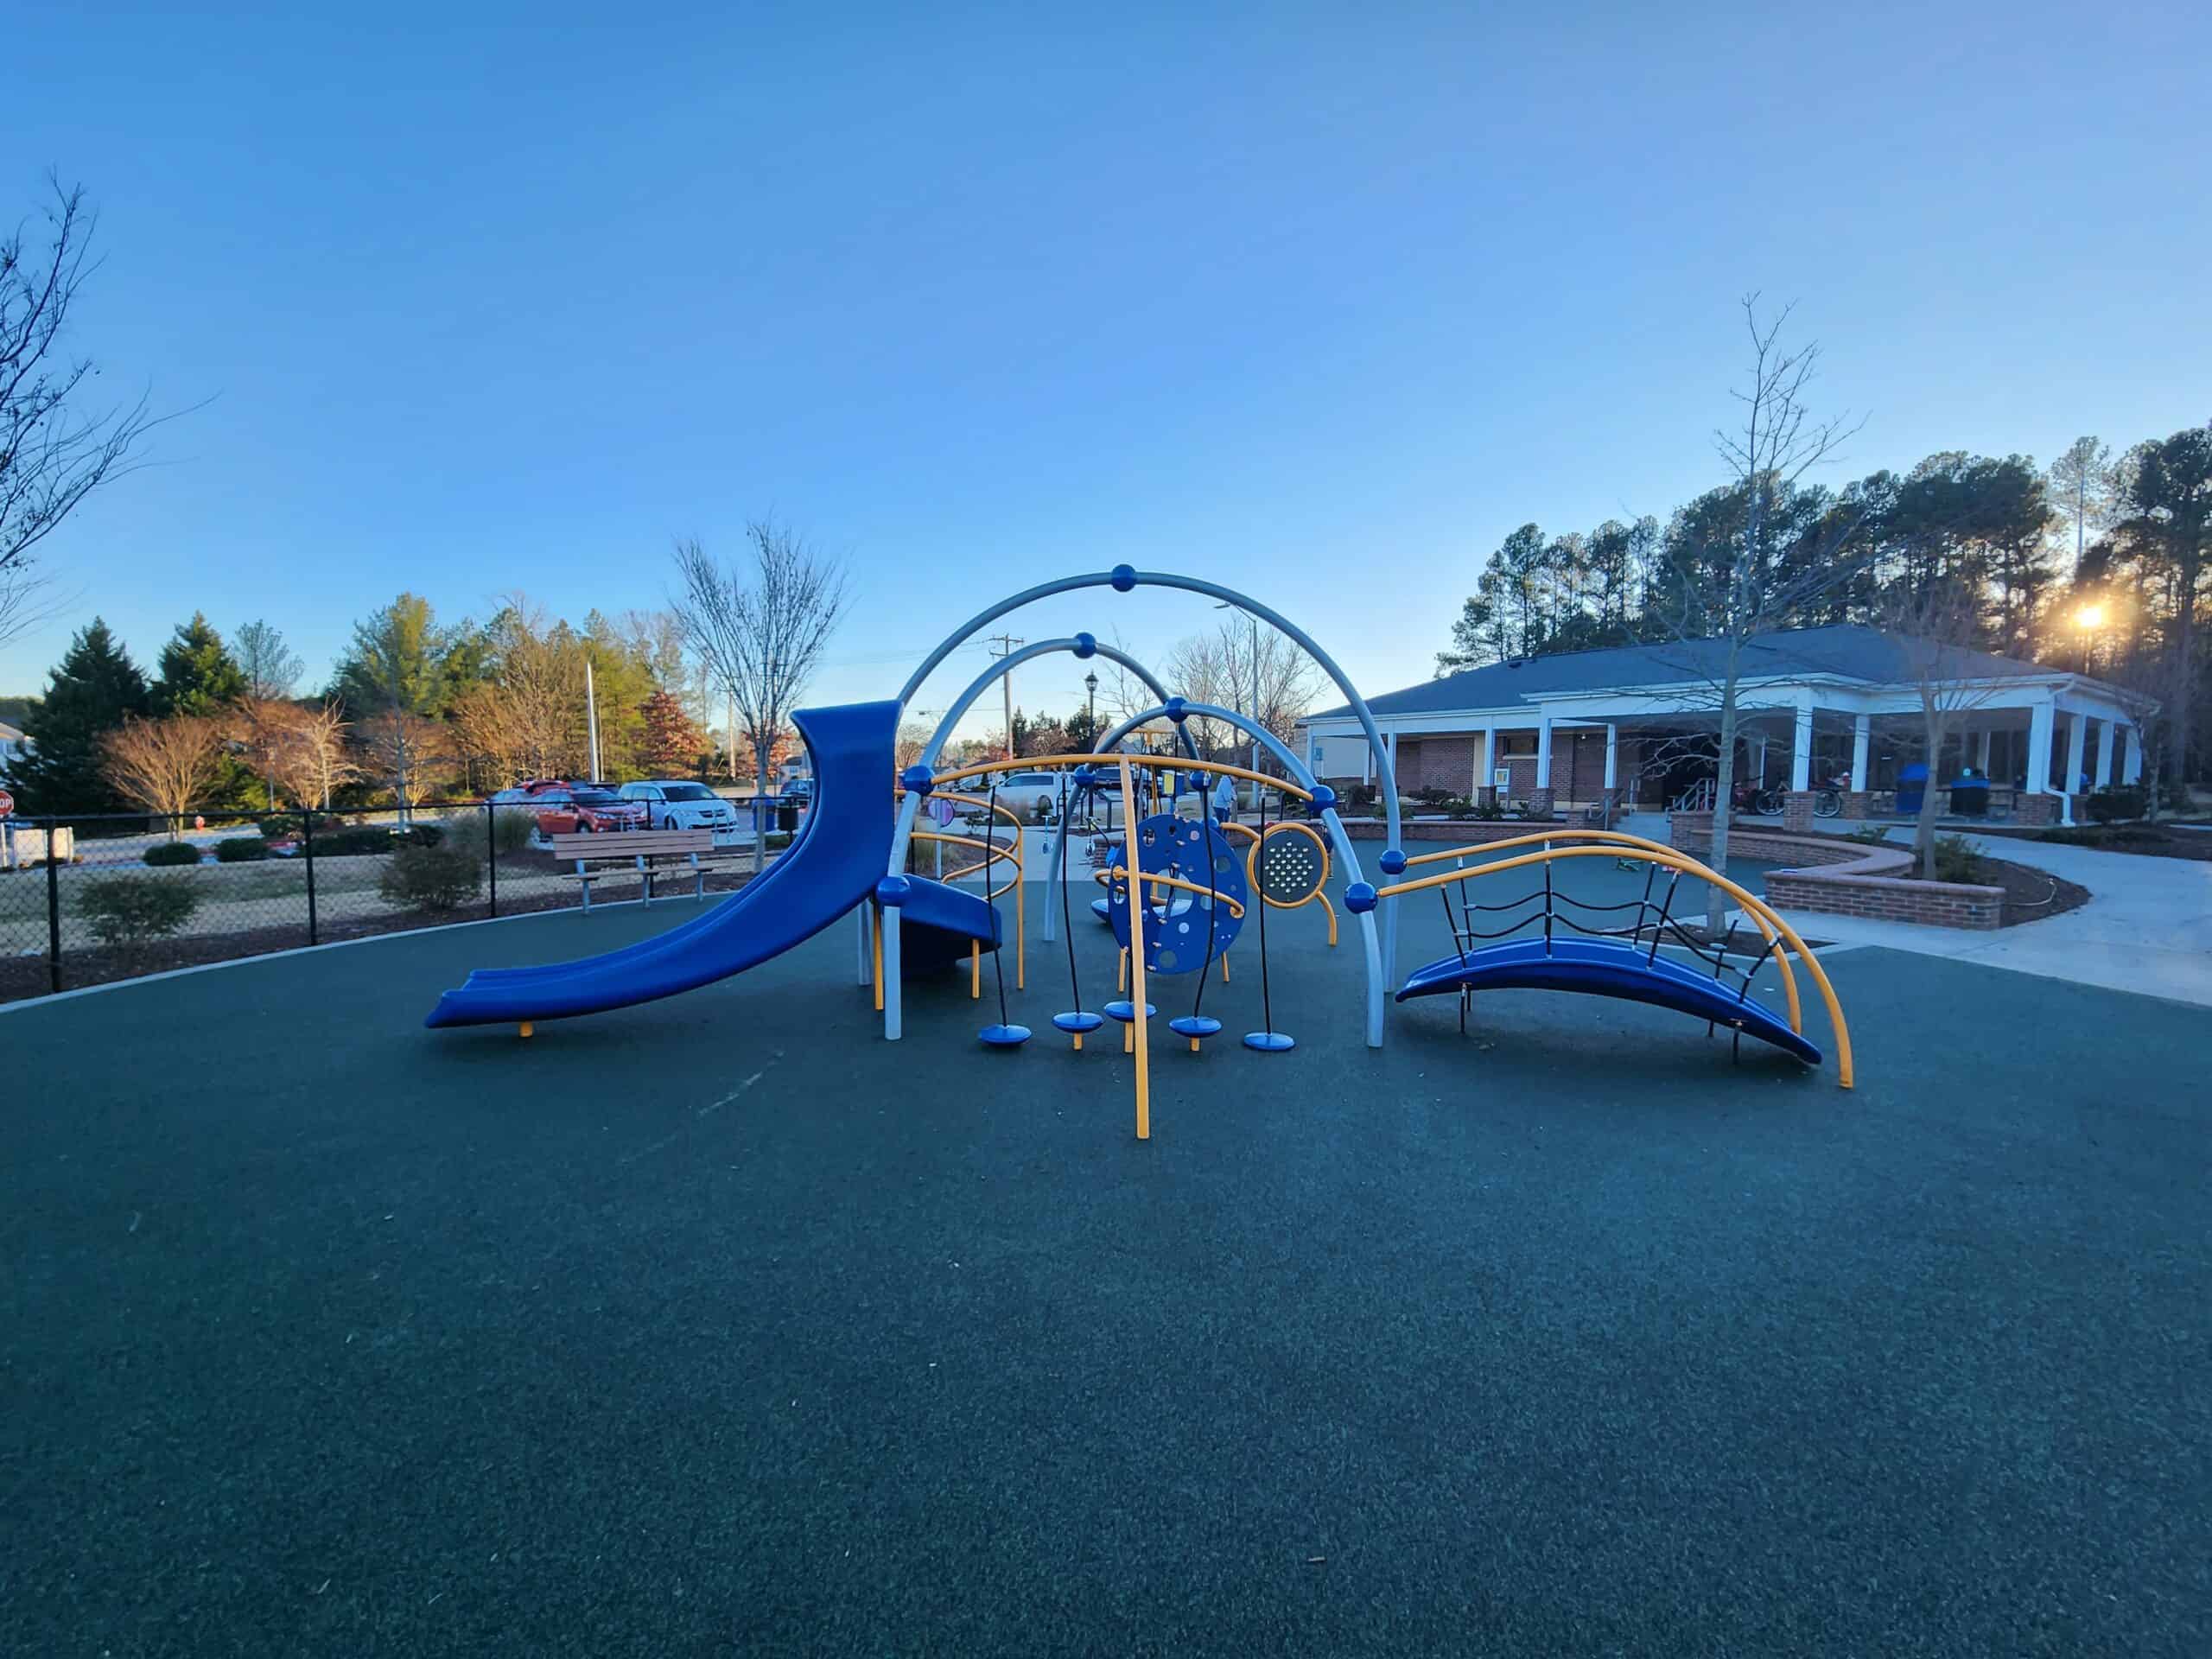 Northwest Park in Morrisville, NC, featuring a playground with blue and yellow equipment. The image shows a curved blue slide, overhead climbing apparatus, and a low-to-ground balance structure on a green rubber surface. The sun is setting behind a building with white columns, giving a serene atmosphere to the park